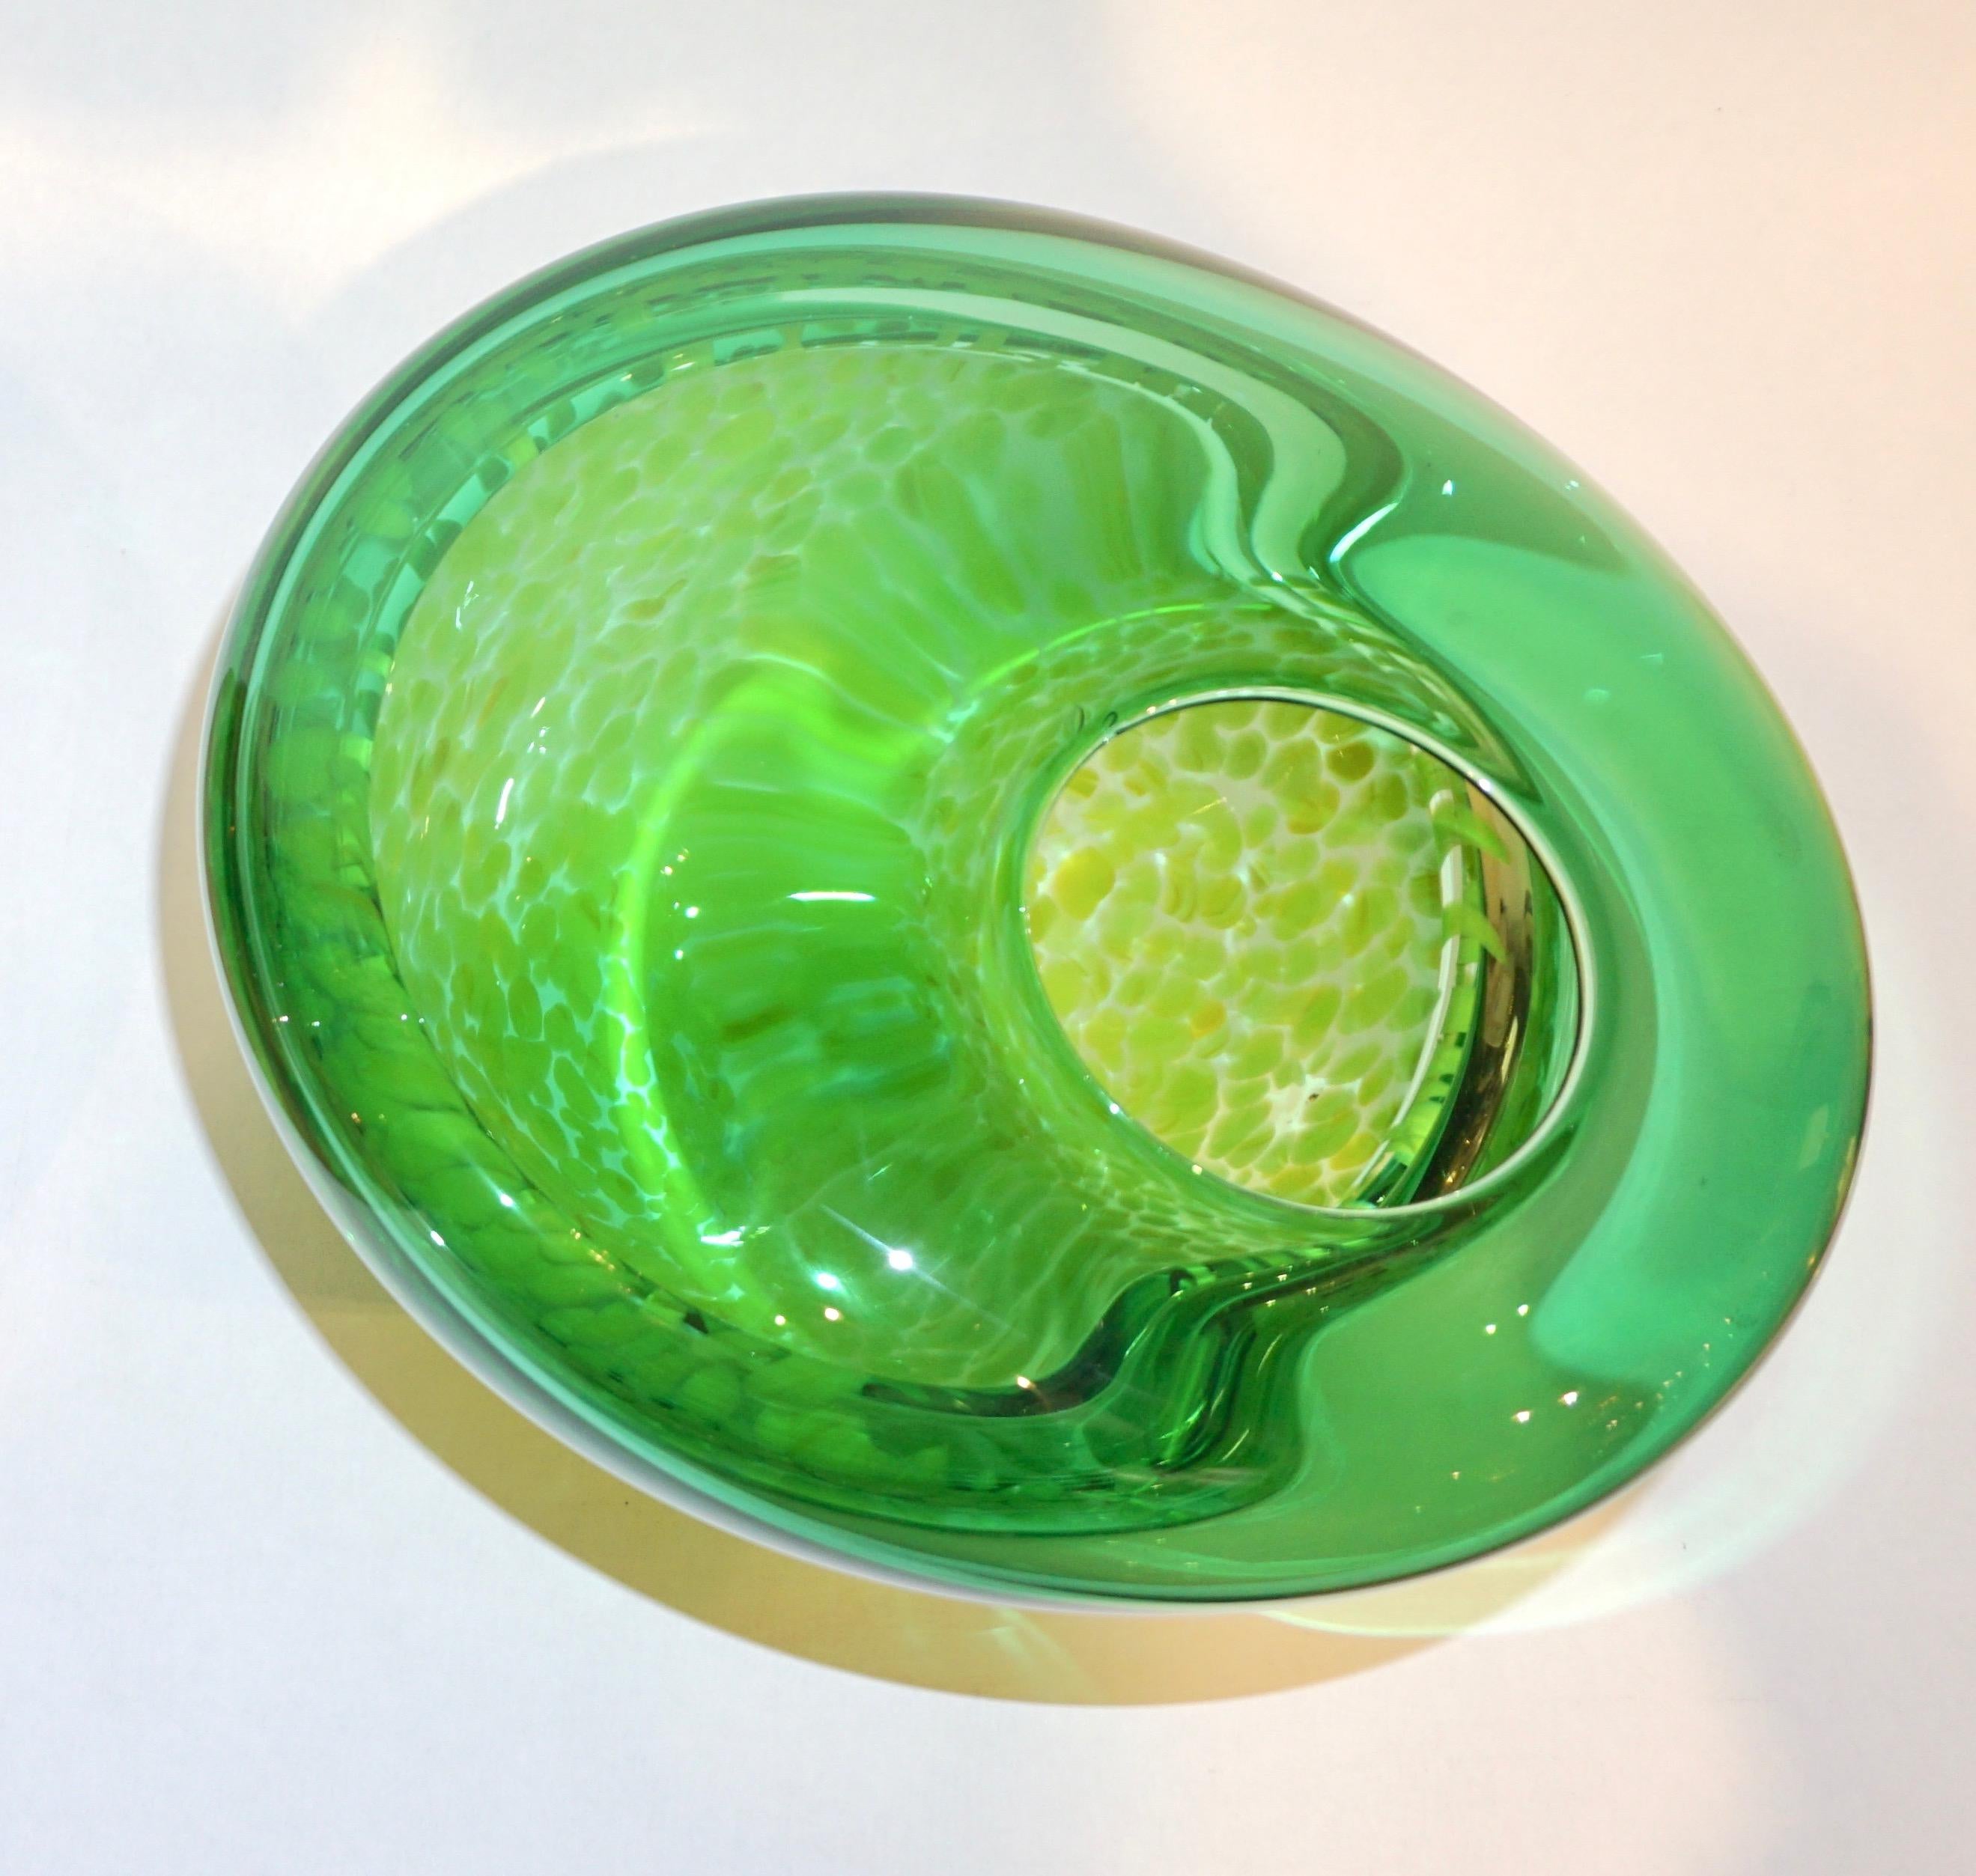 Hilton McConnico by Formia 1990s Italian Green Spotted Murano Art Glass Vase 1